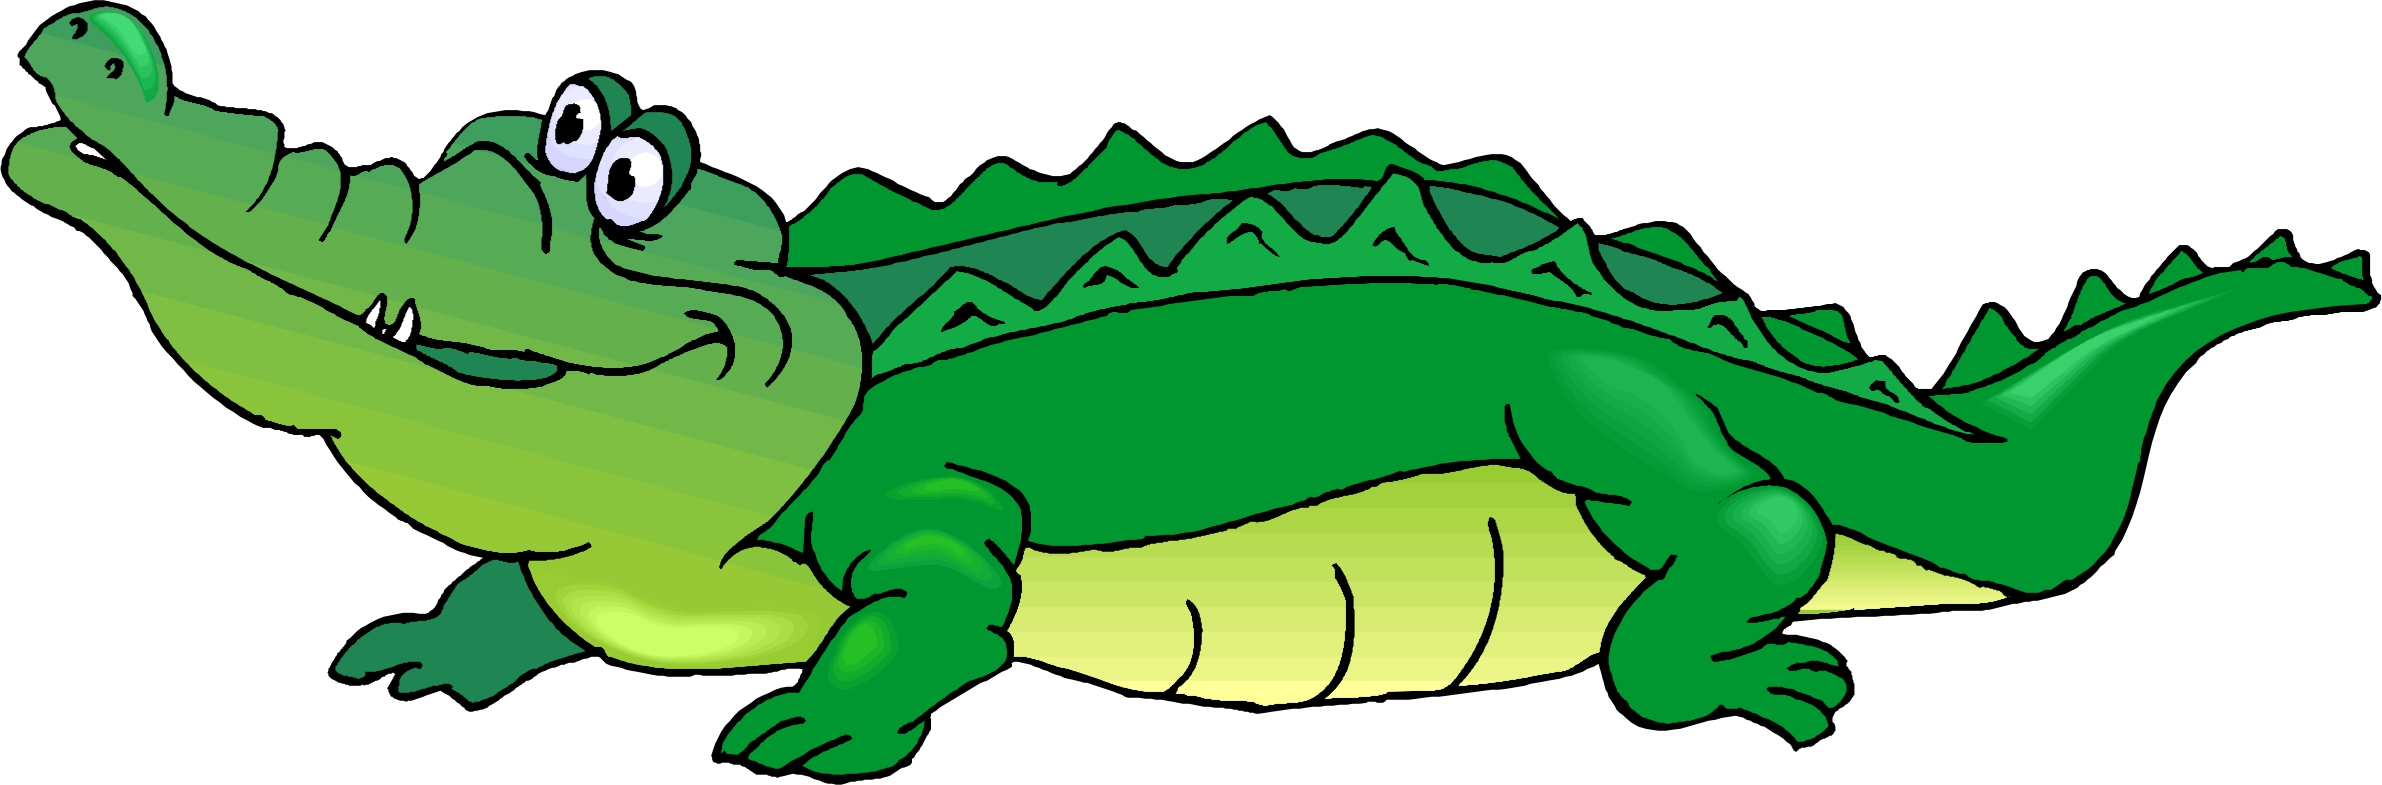 Cute Baby Alligator Clipart | Clipart Panda - Free Clipart Images